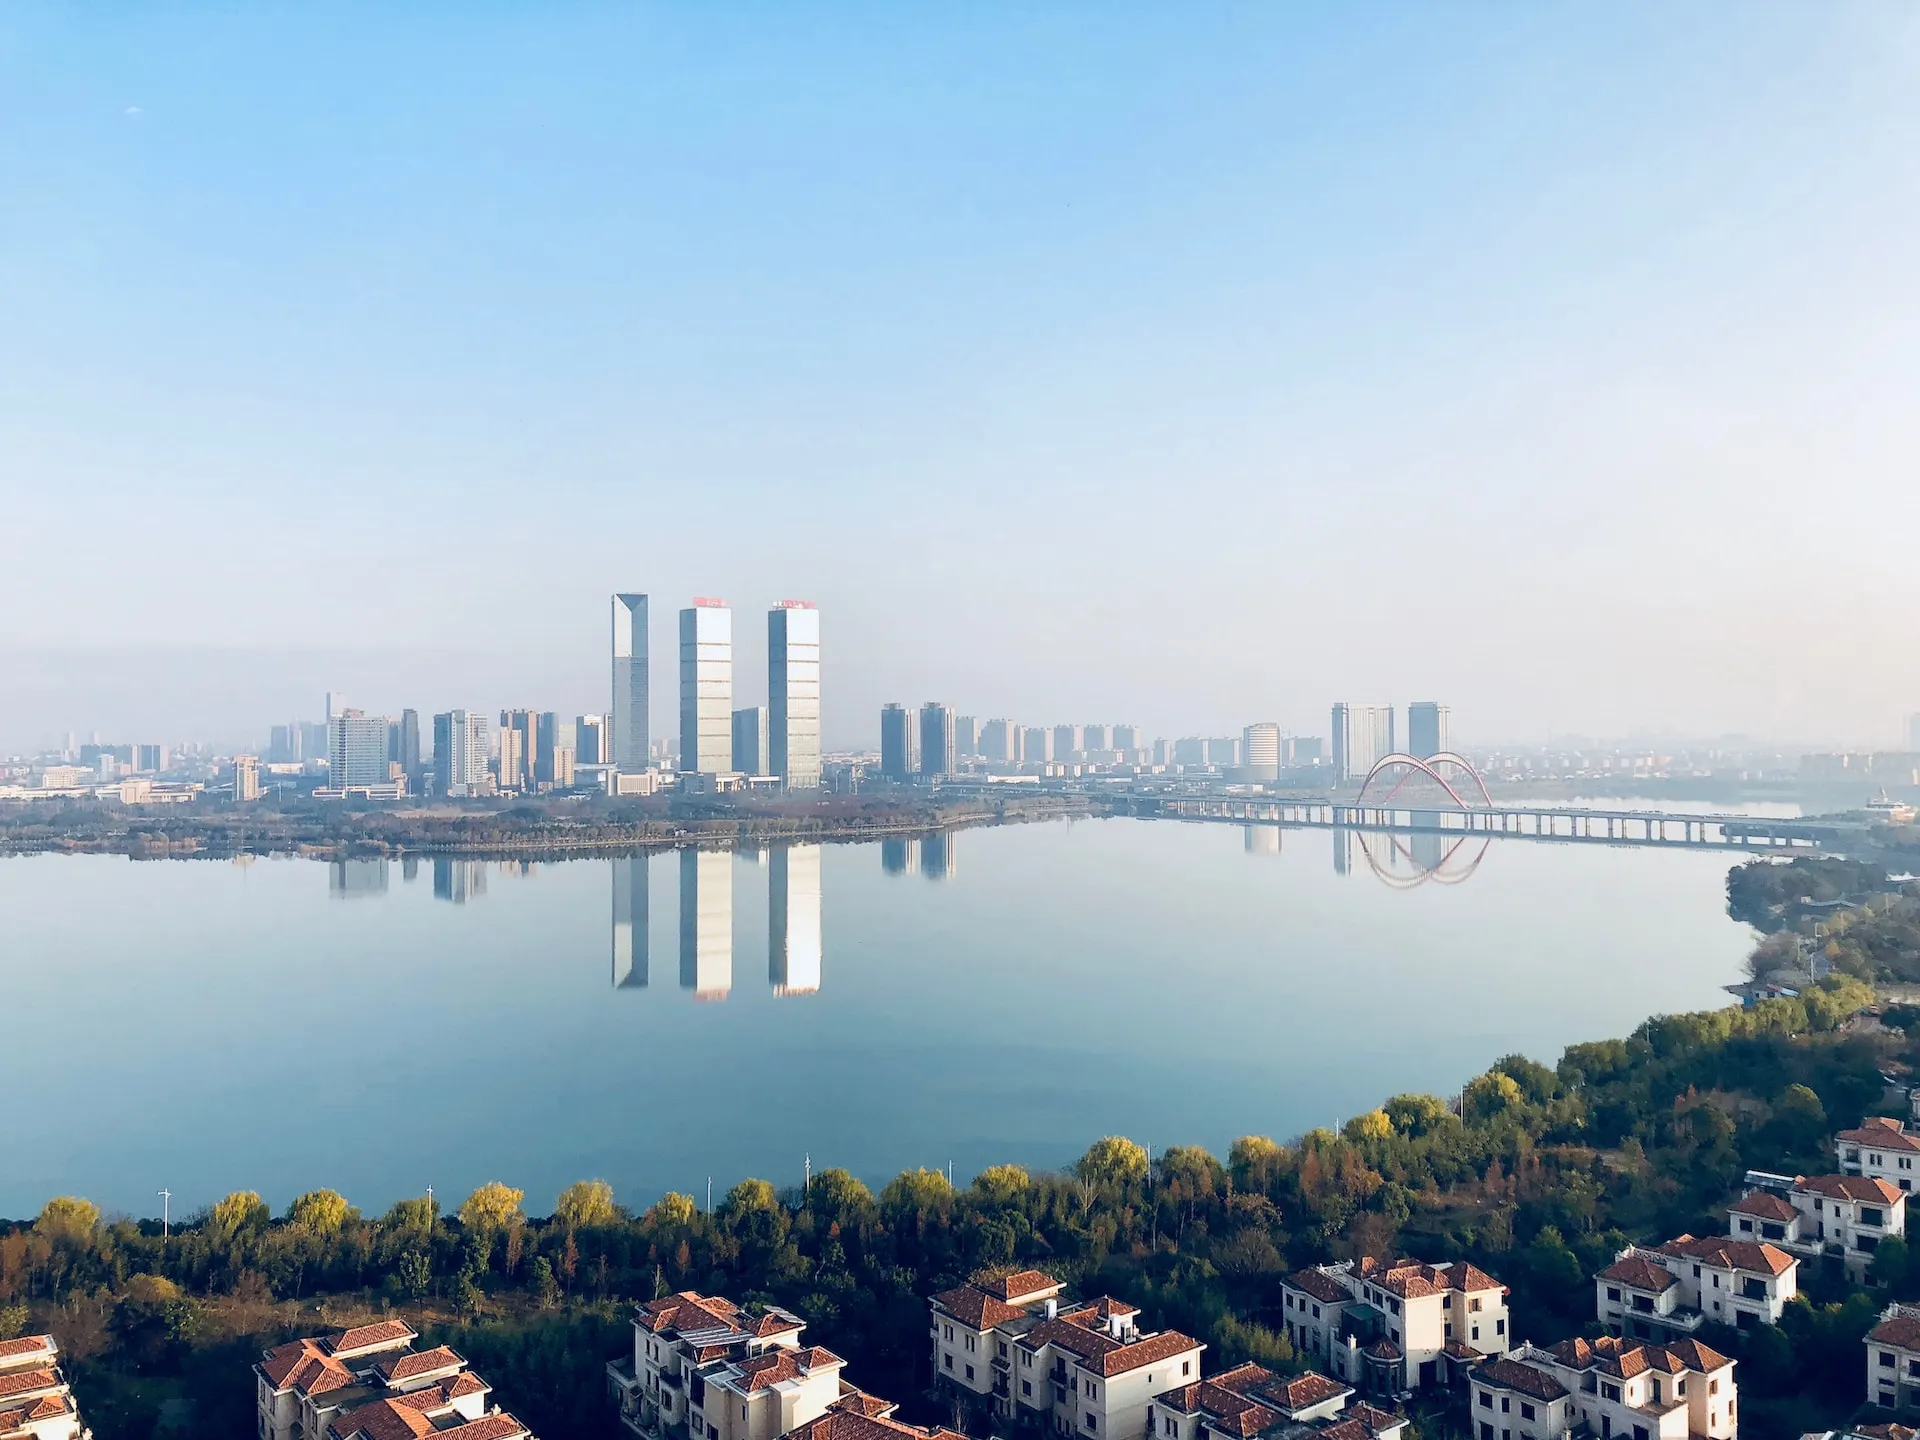 Cityscape of Nanchang. Source: Photo by William Lu on Unsplash